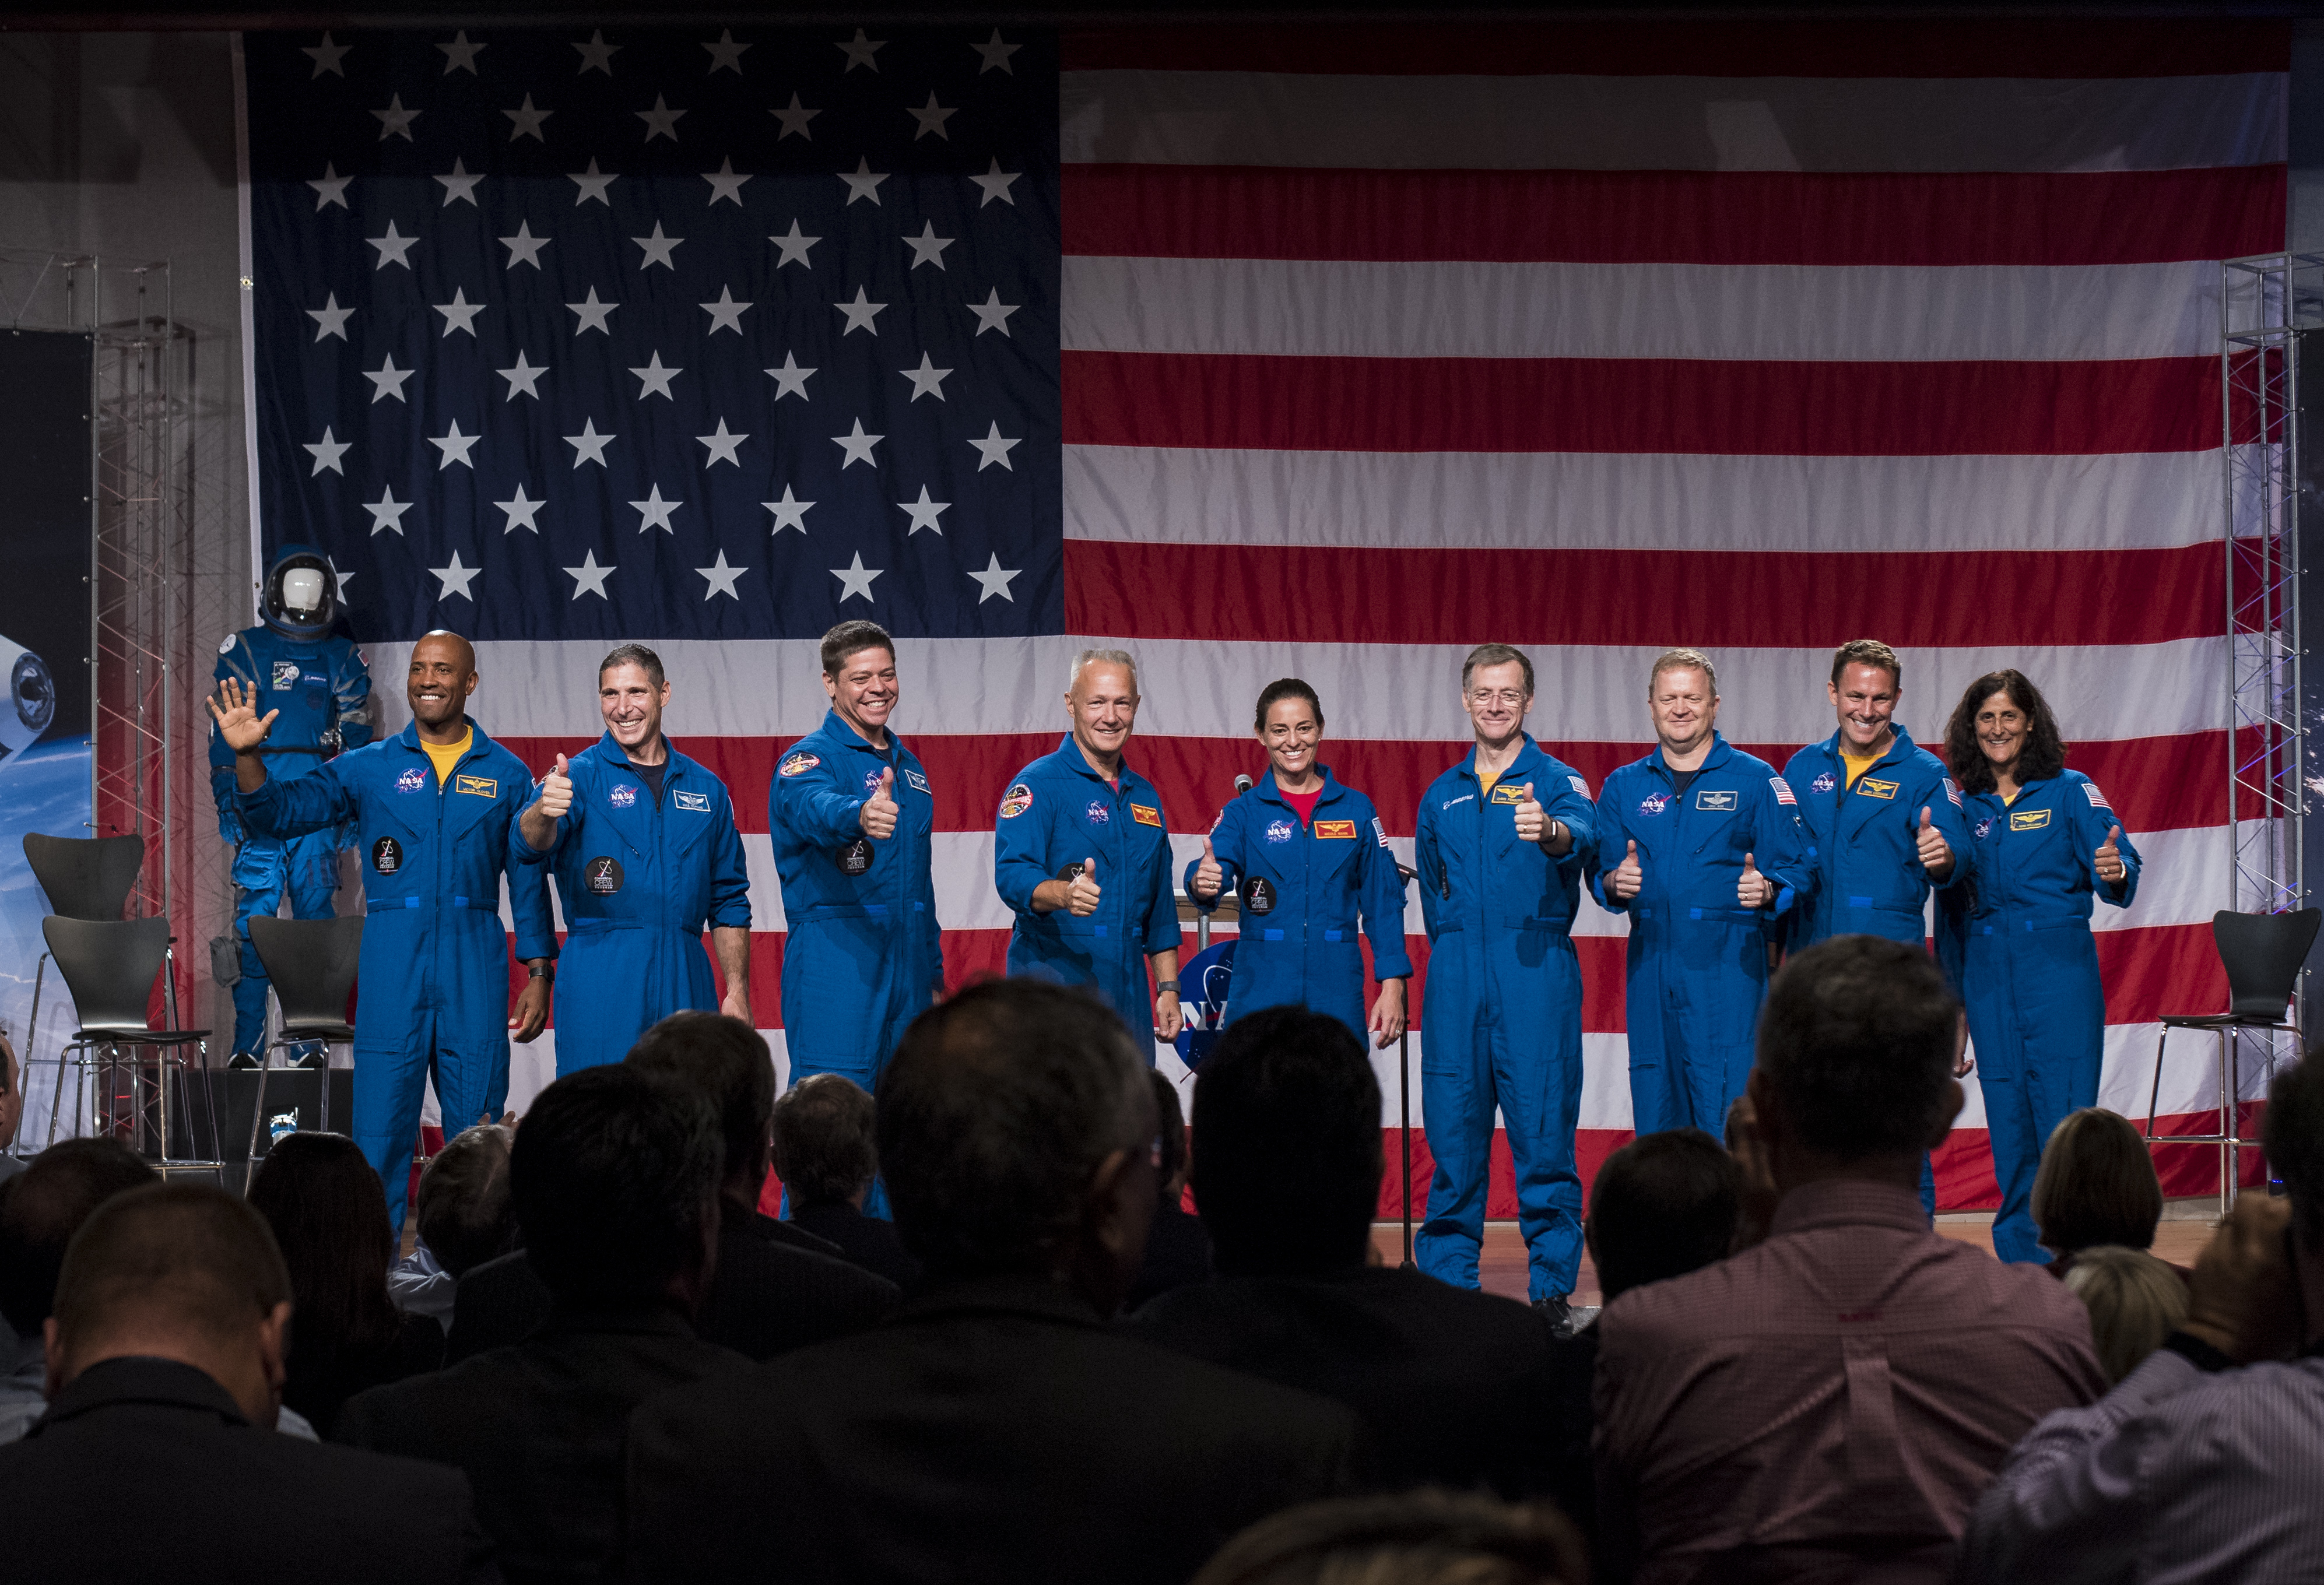 The first U.S. astronauts who will fly on American-made, commercial spacecraft to and from the International Space Station